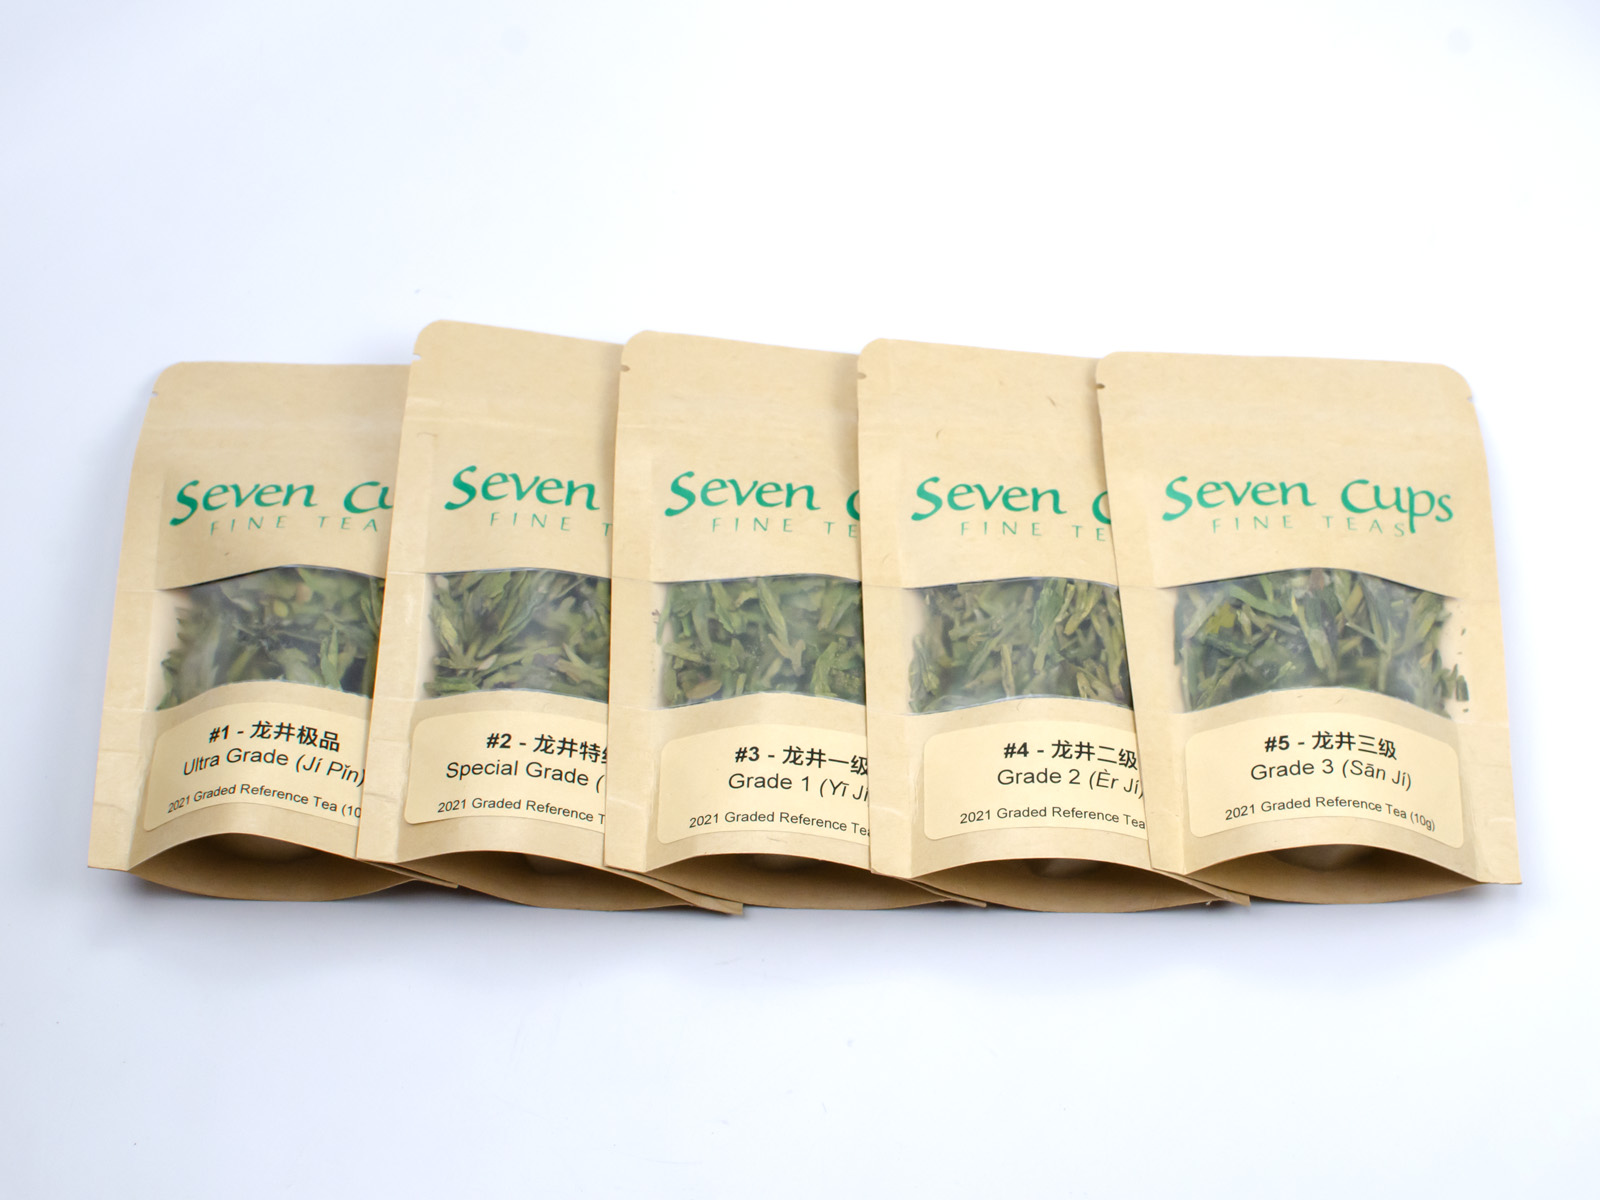 Small bags of the five Longjing teas included in the Dragon Well sampler, spread out in a straight line.